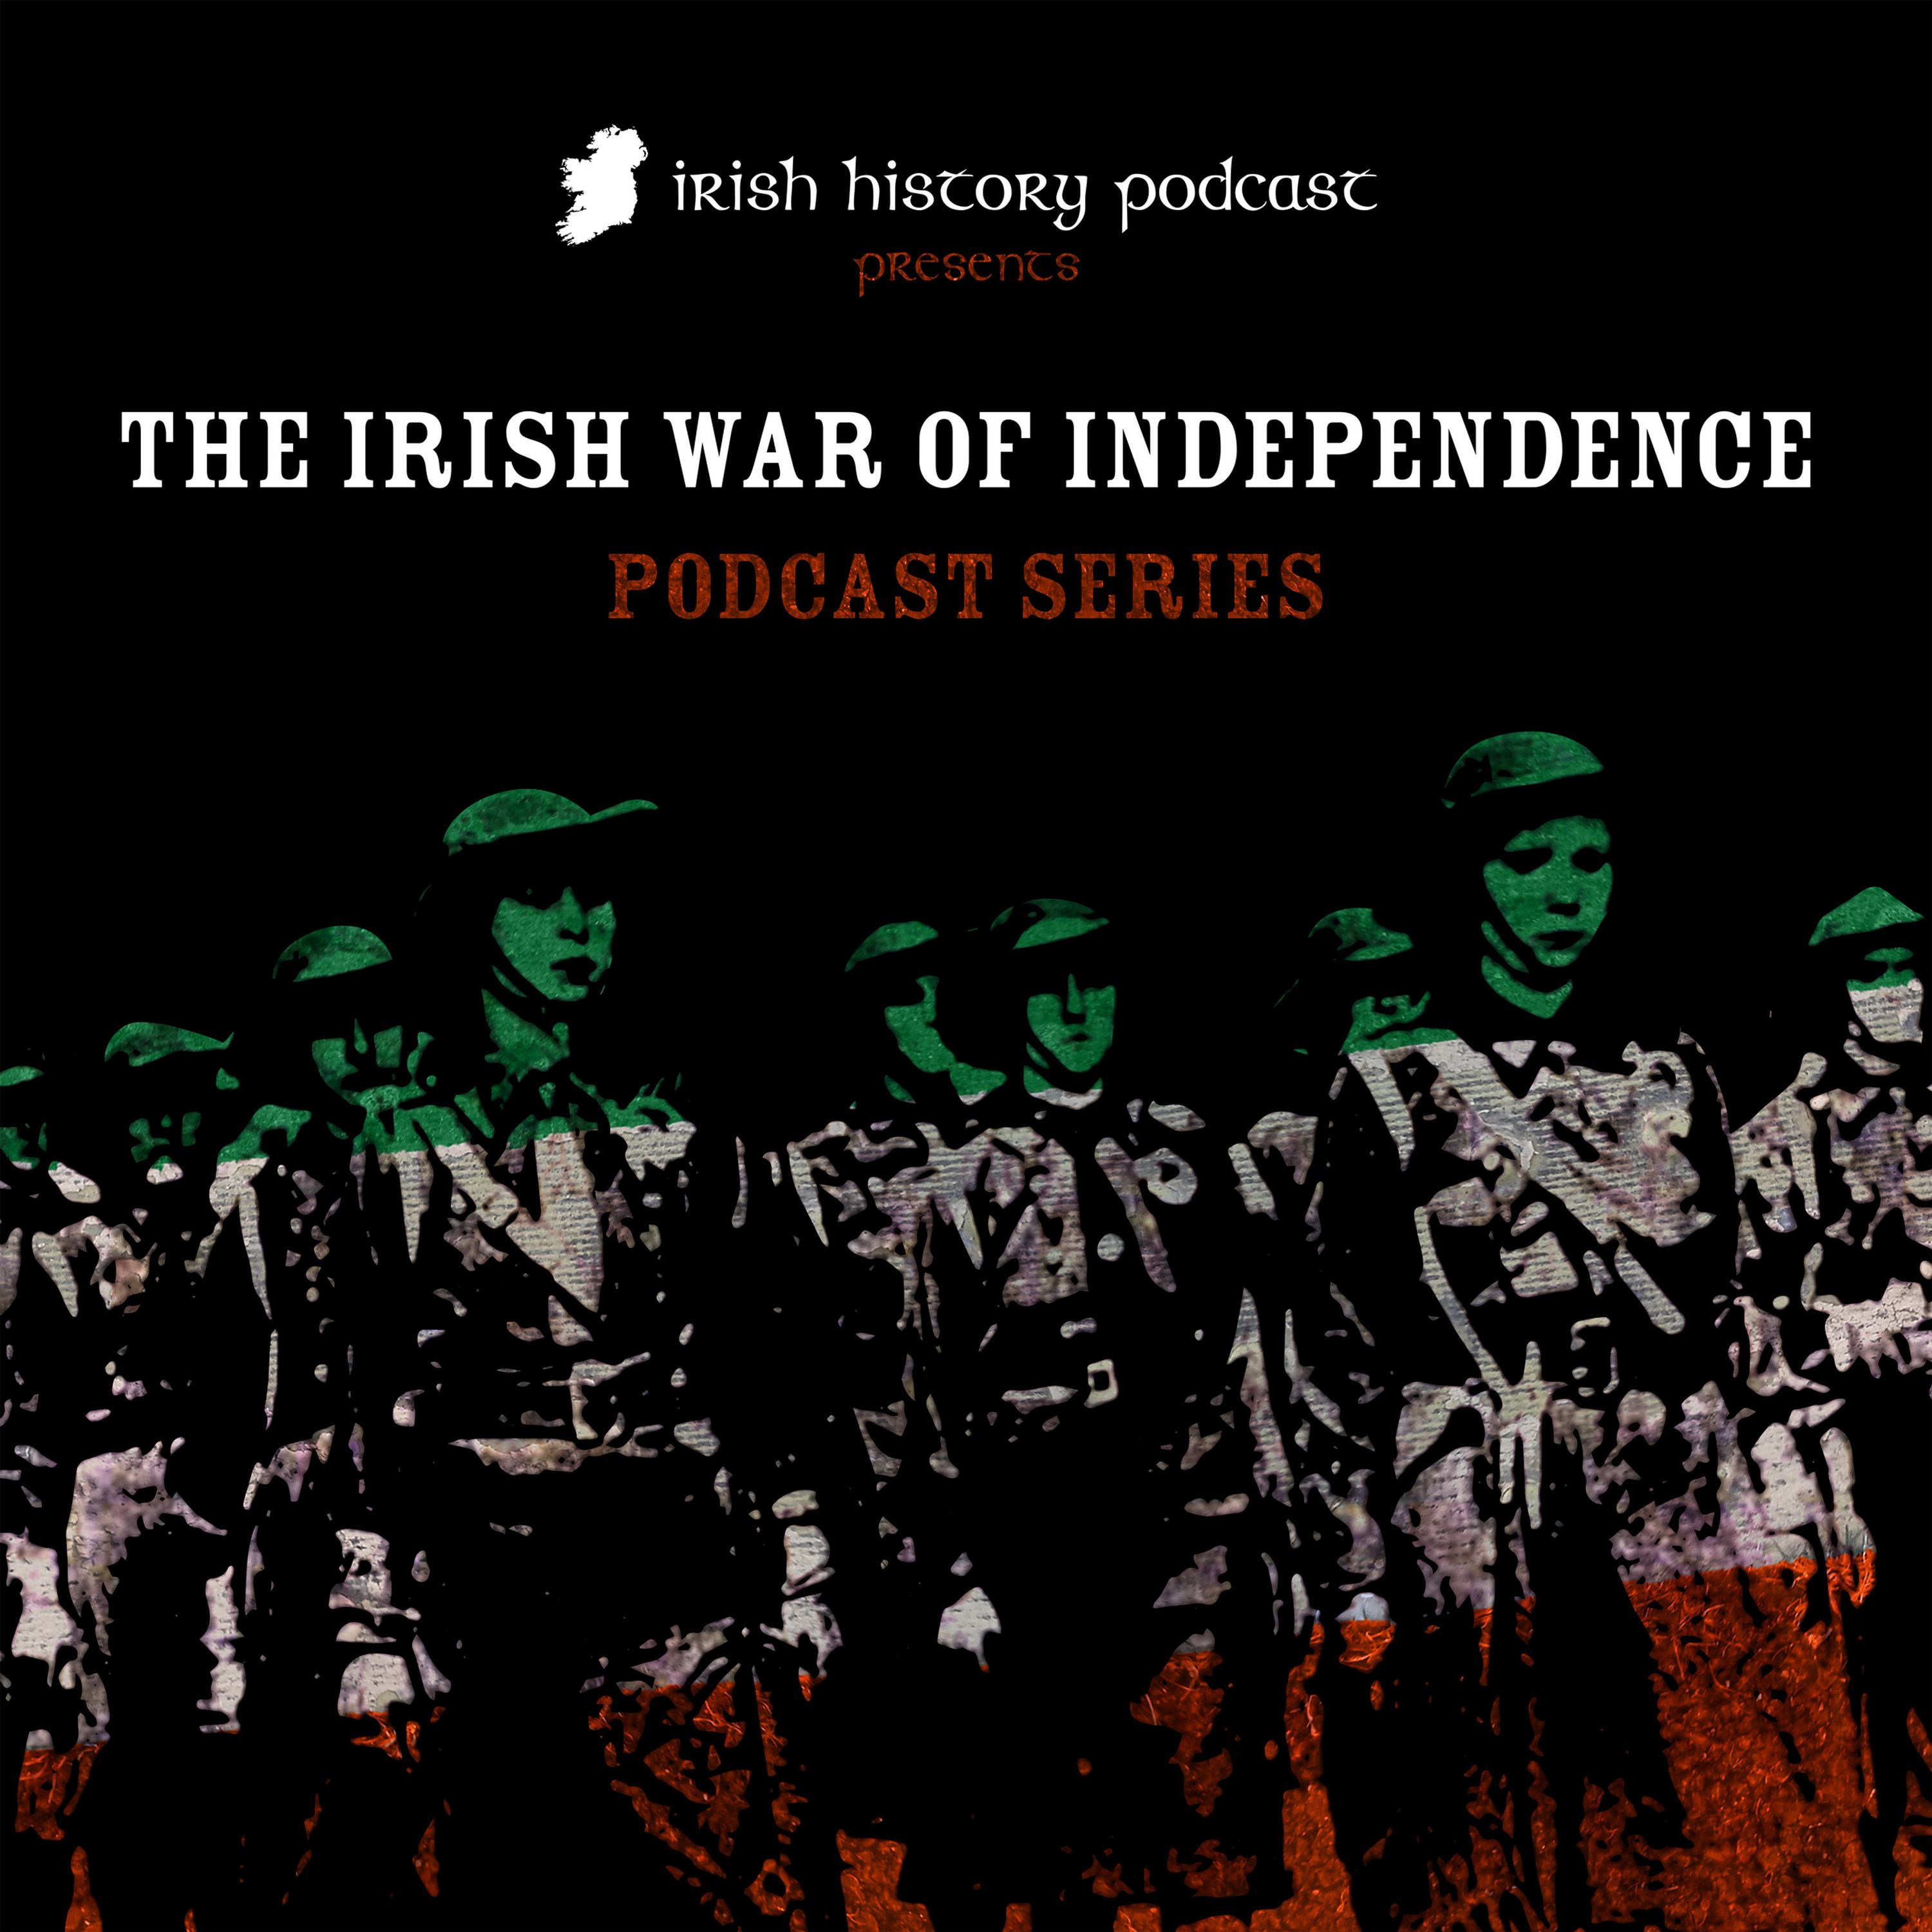 The IRA Campaign in Britain (The War of Independence Part XVII)